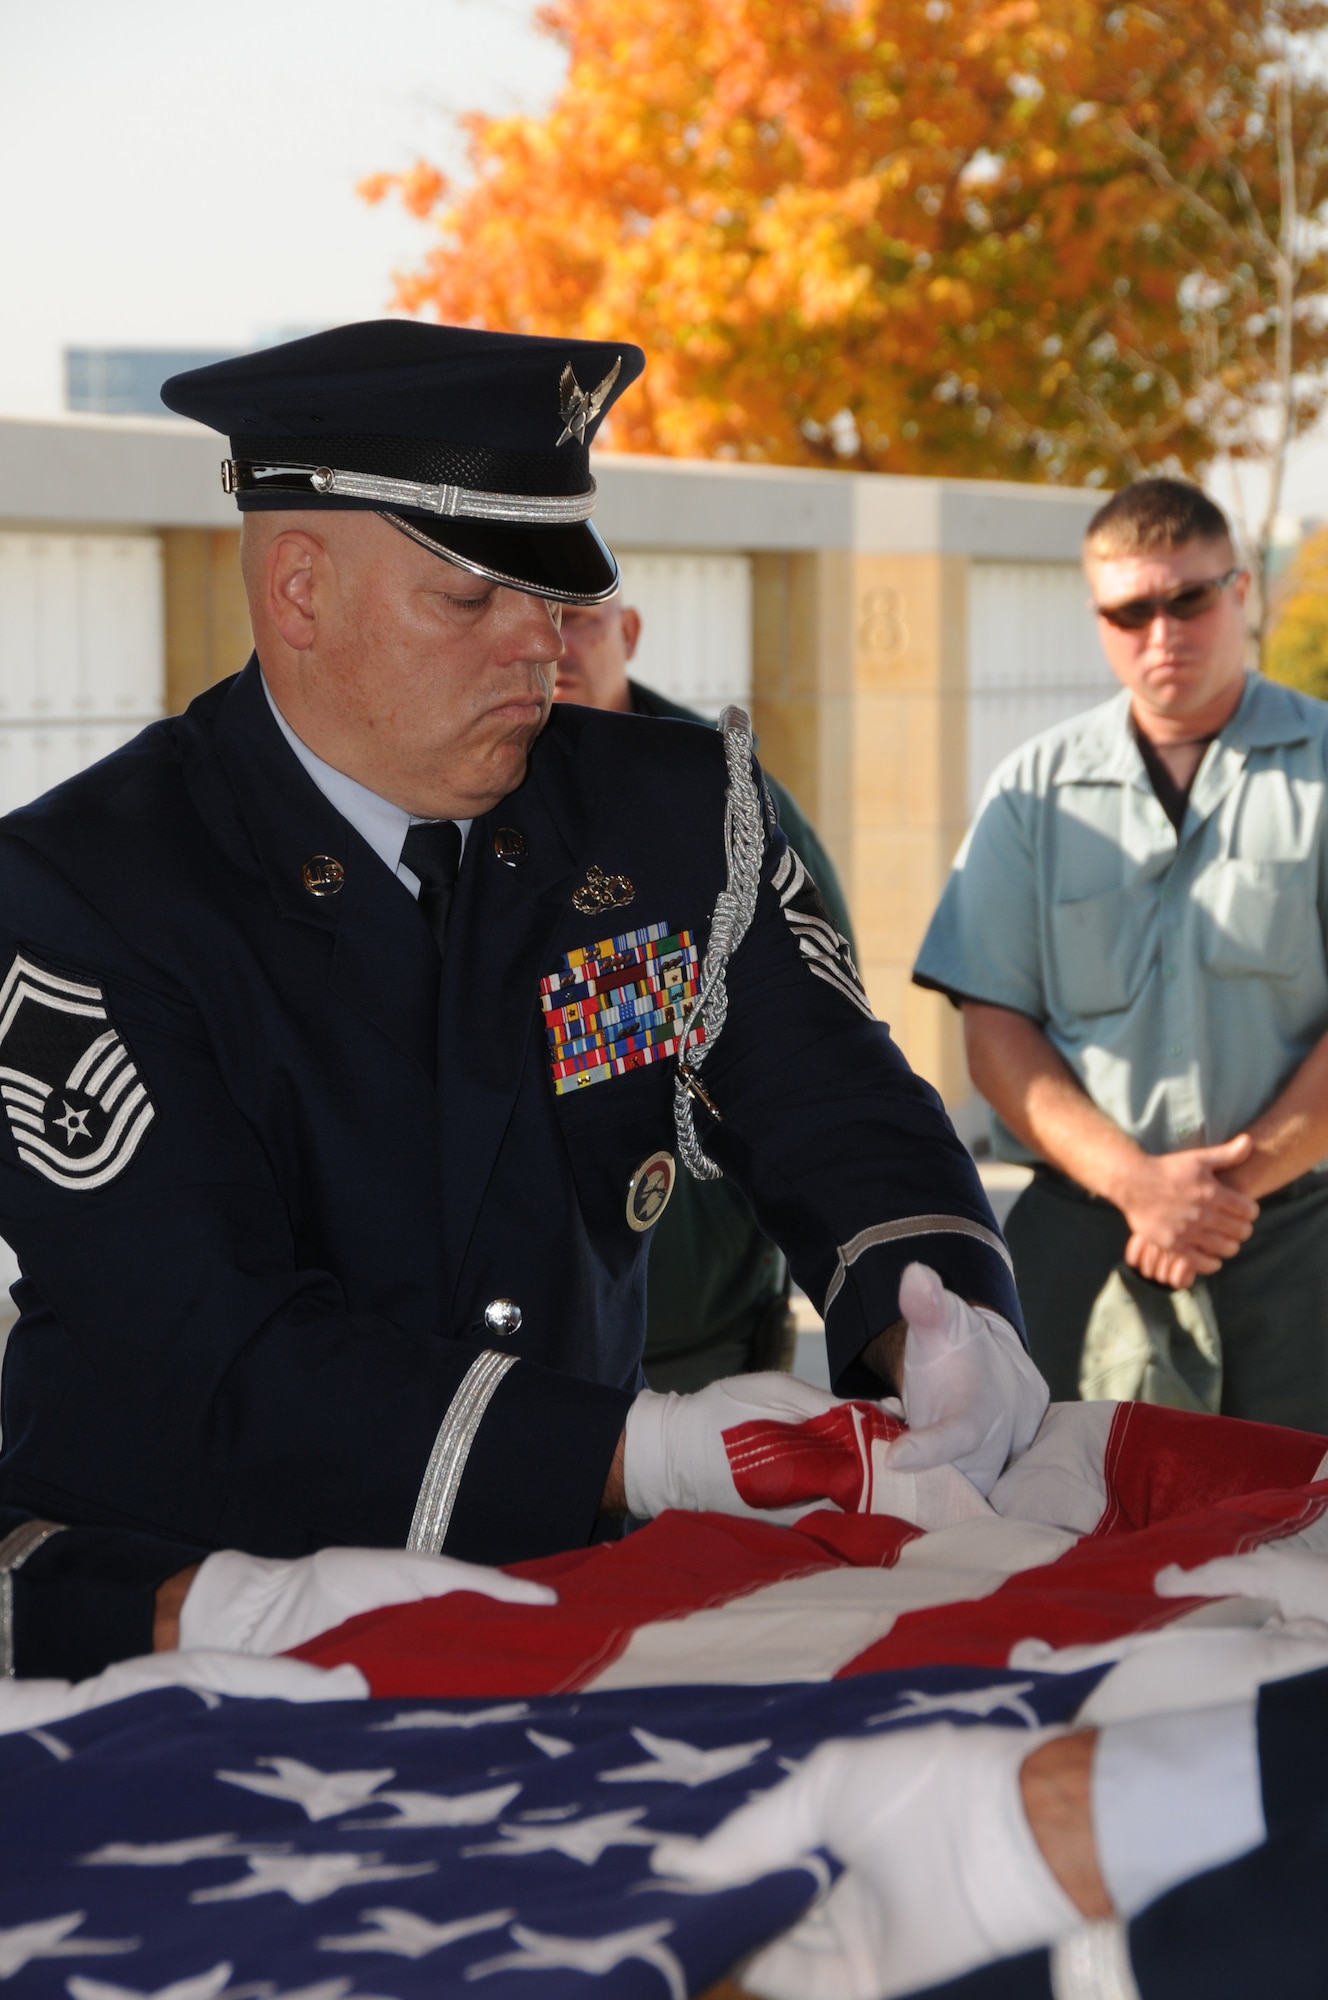 Senior Master Sgt. Dave Gonsoski, superintendant of the power production shop at the 133rd Civil Engineer Squadron, folds a flag over the remains of a fallen Airman during a funeral at the Fort Snelling Cemetery in Minneapolis, Minn. on Oct 12, 2010. Gonsoski has been selected to represent Minnesota as the Air Guard Outstanding Honor Guard member for 2011. USAF official photo by Senior Master Sgt. Mark Moss